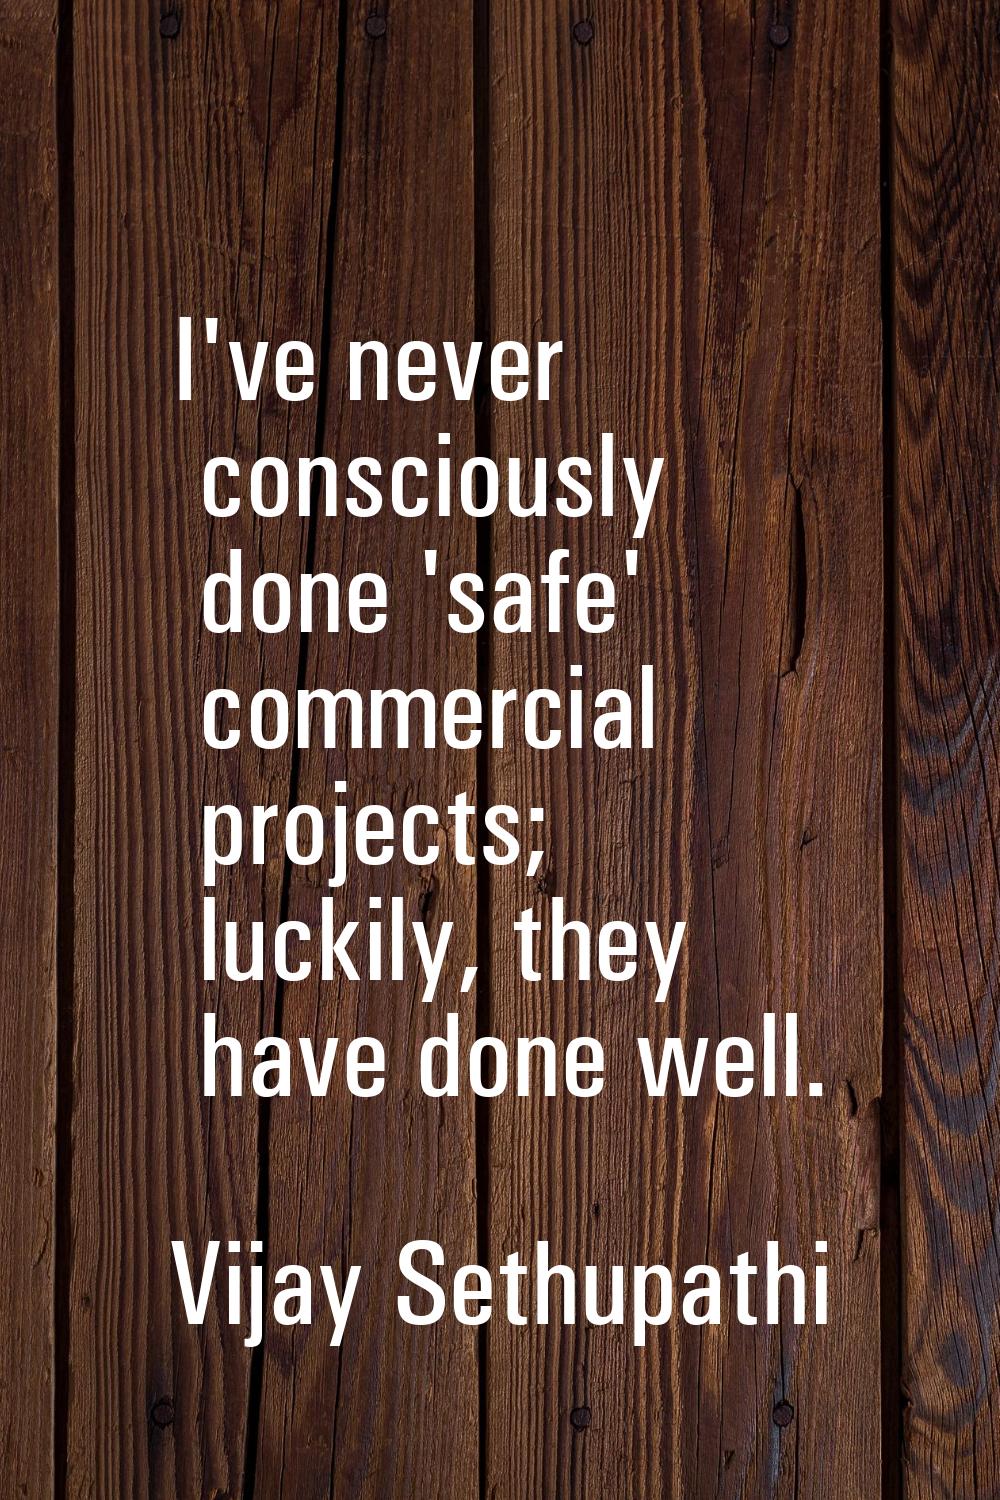 I've never consciously done 'safe' commercial projects; luckily, they have done well.